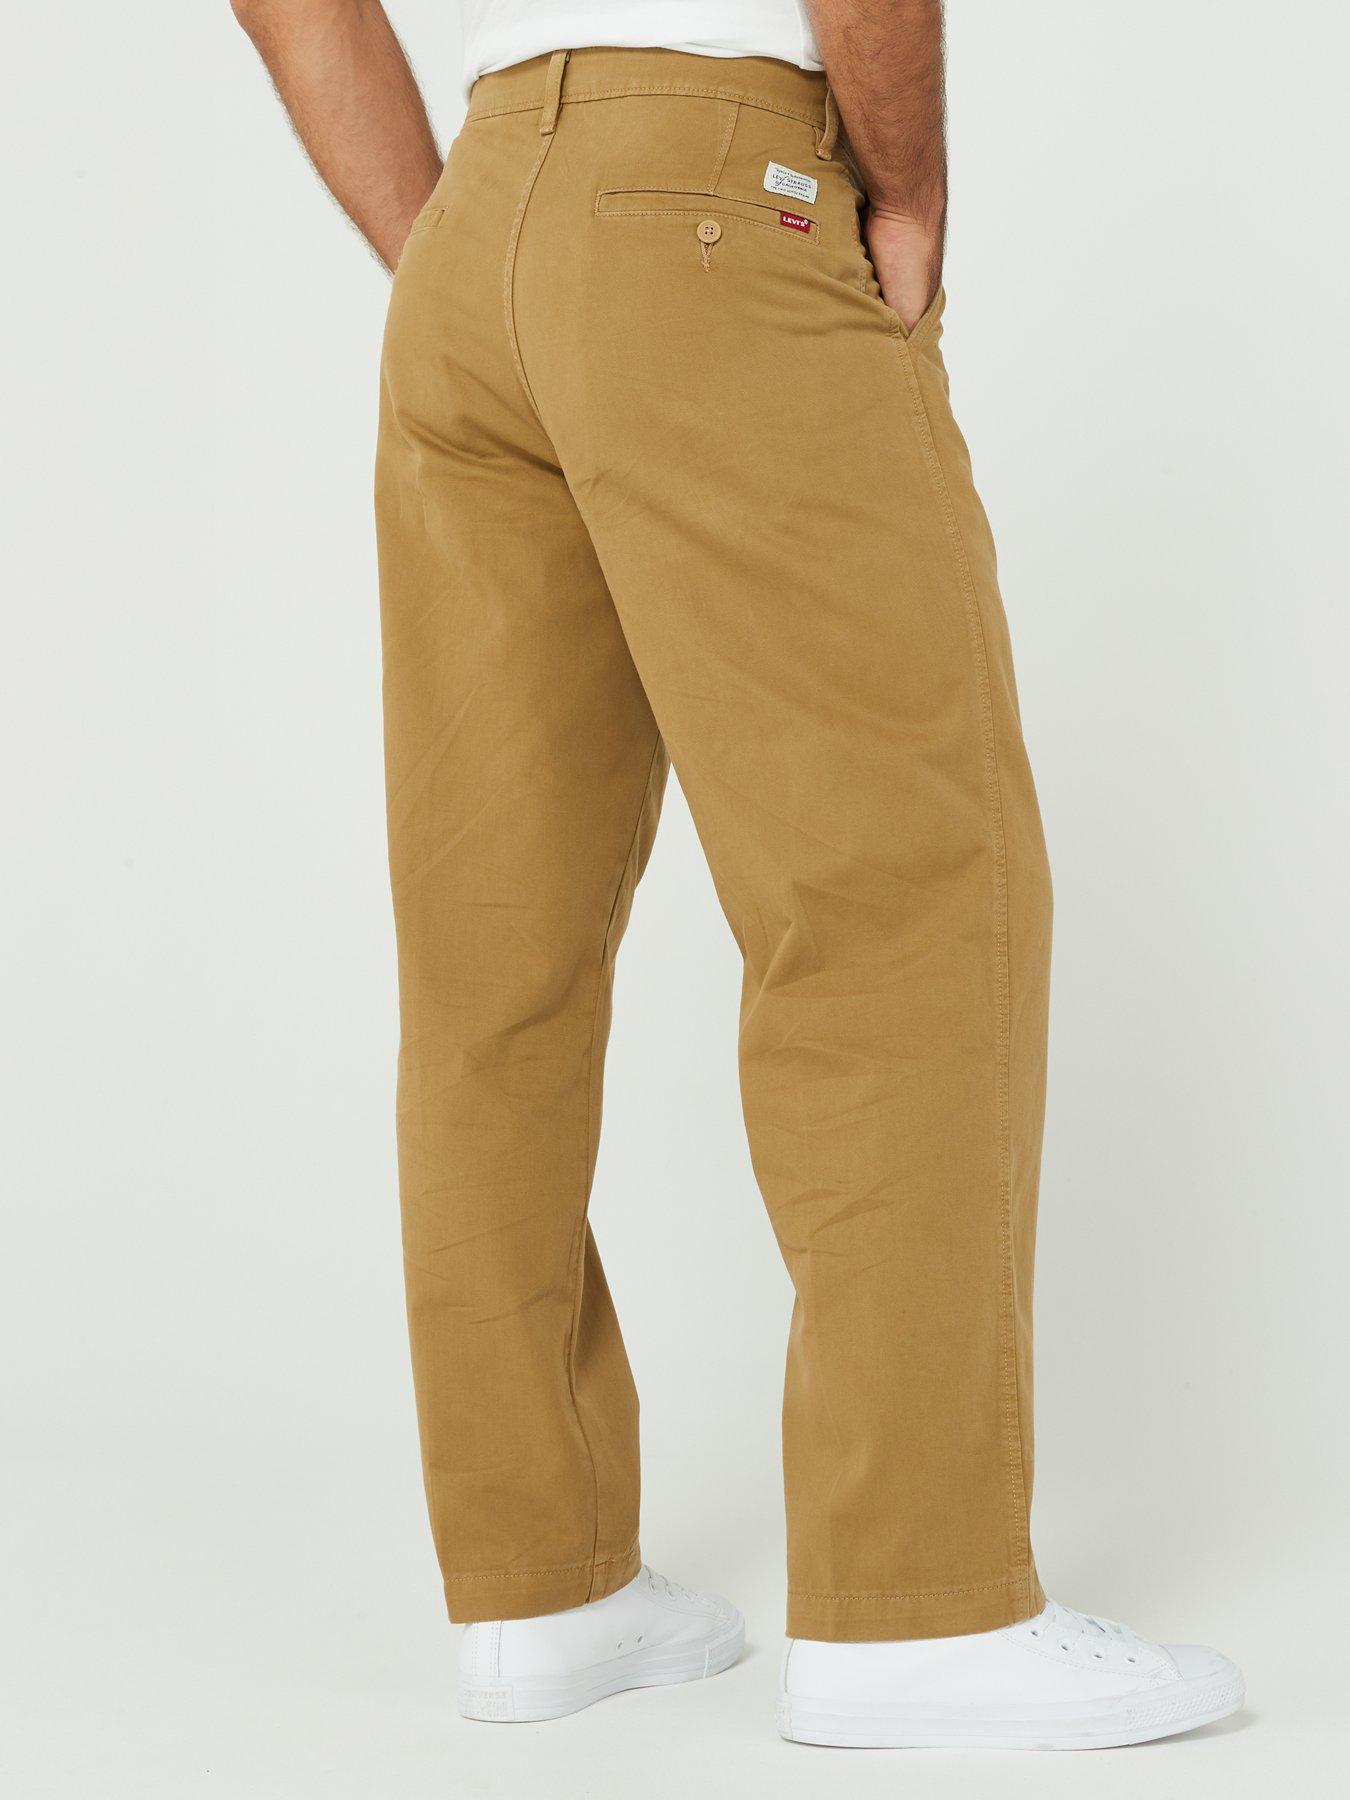 XX Stay Loose Chino Trousers - Beige